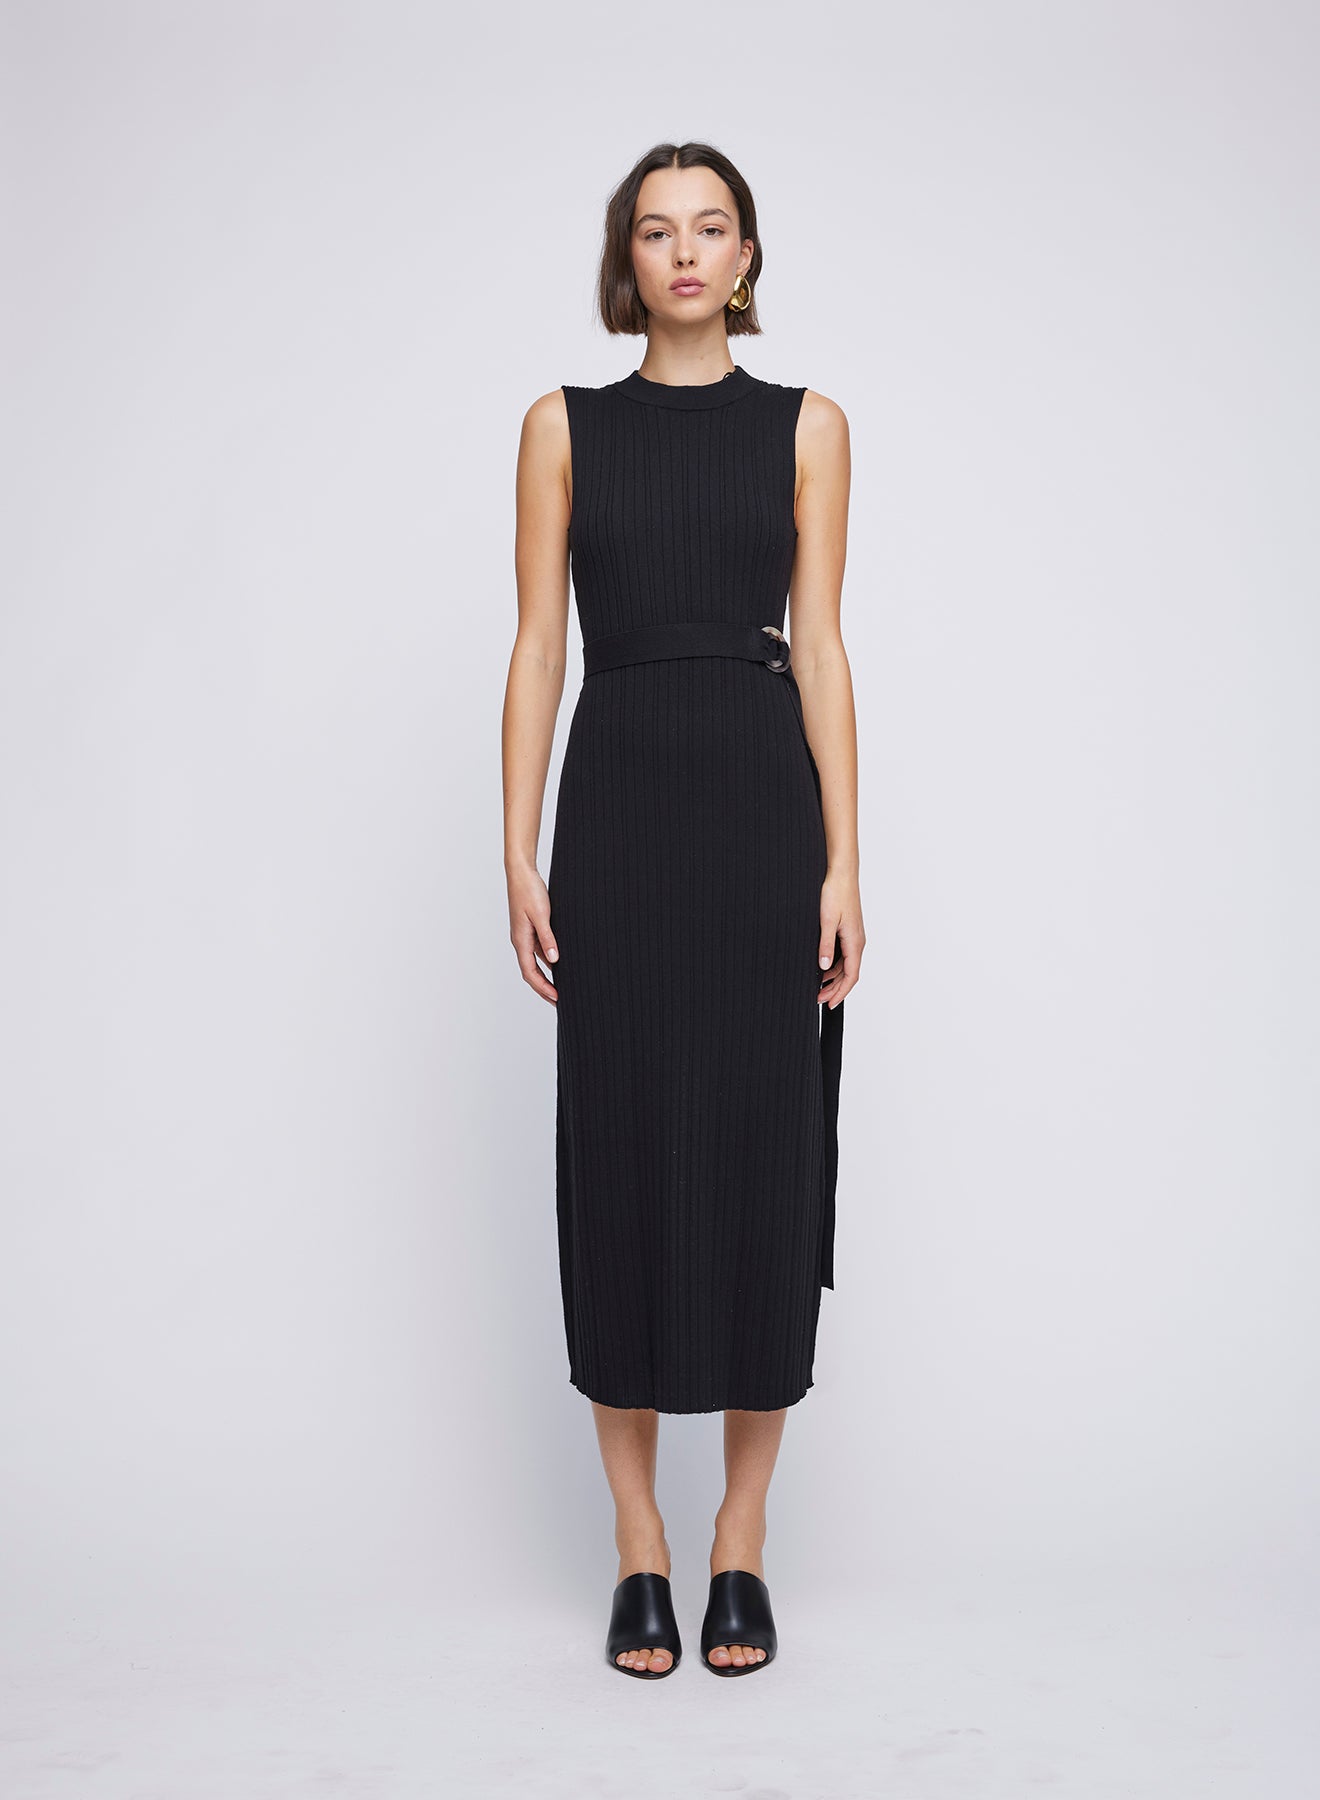 ANNA QUAN Sleeveless Crew Neck Dress with ring belt detail. Effortlessly chic, this dress is perfect for any occasion. The modern design and flattering silhouette make it a versatile wardrobe essential. Midi knit dress, everyday knit dress, everyday sleeveless knit dress with waist belt and ring loop.